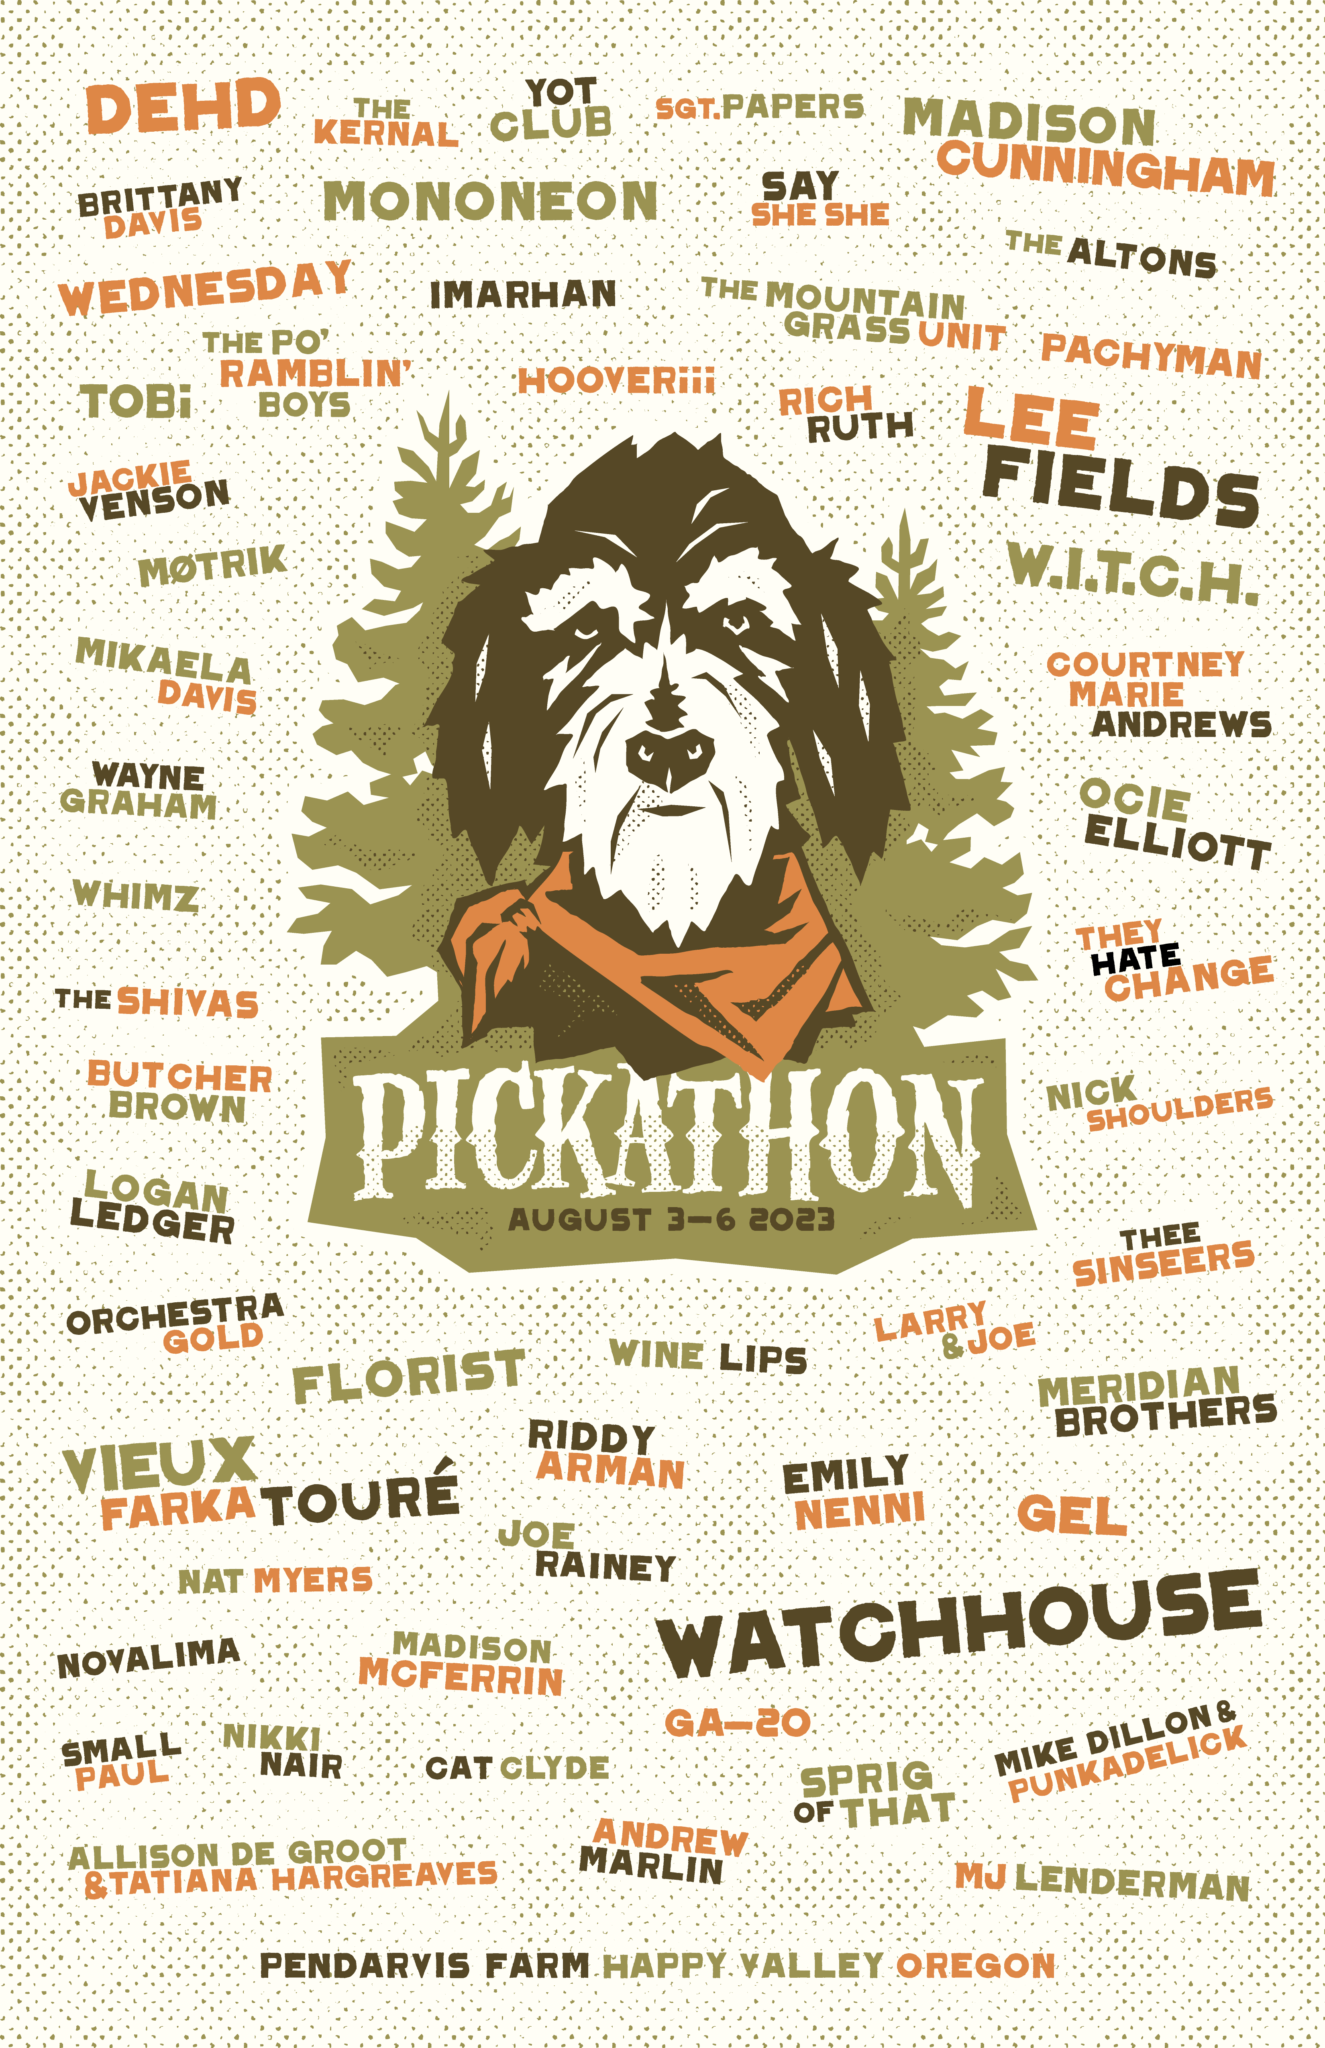 Pickathon 2023 w/ Watchhouse, Lee Fields, Dehd, Madison Cunningham and more - Aug. 3-6: Happy Valley, OR